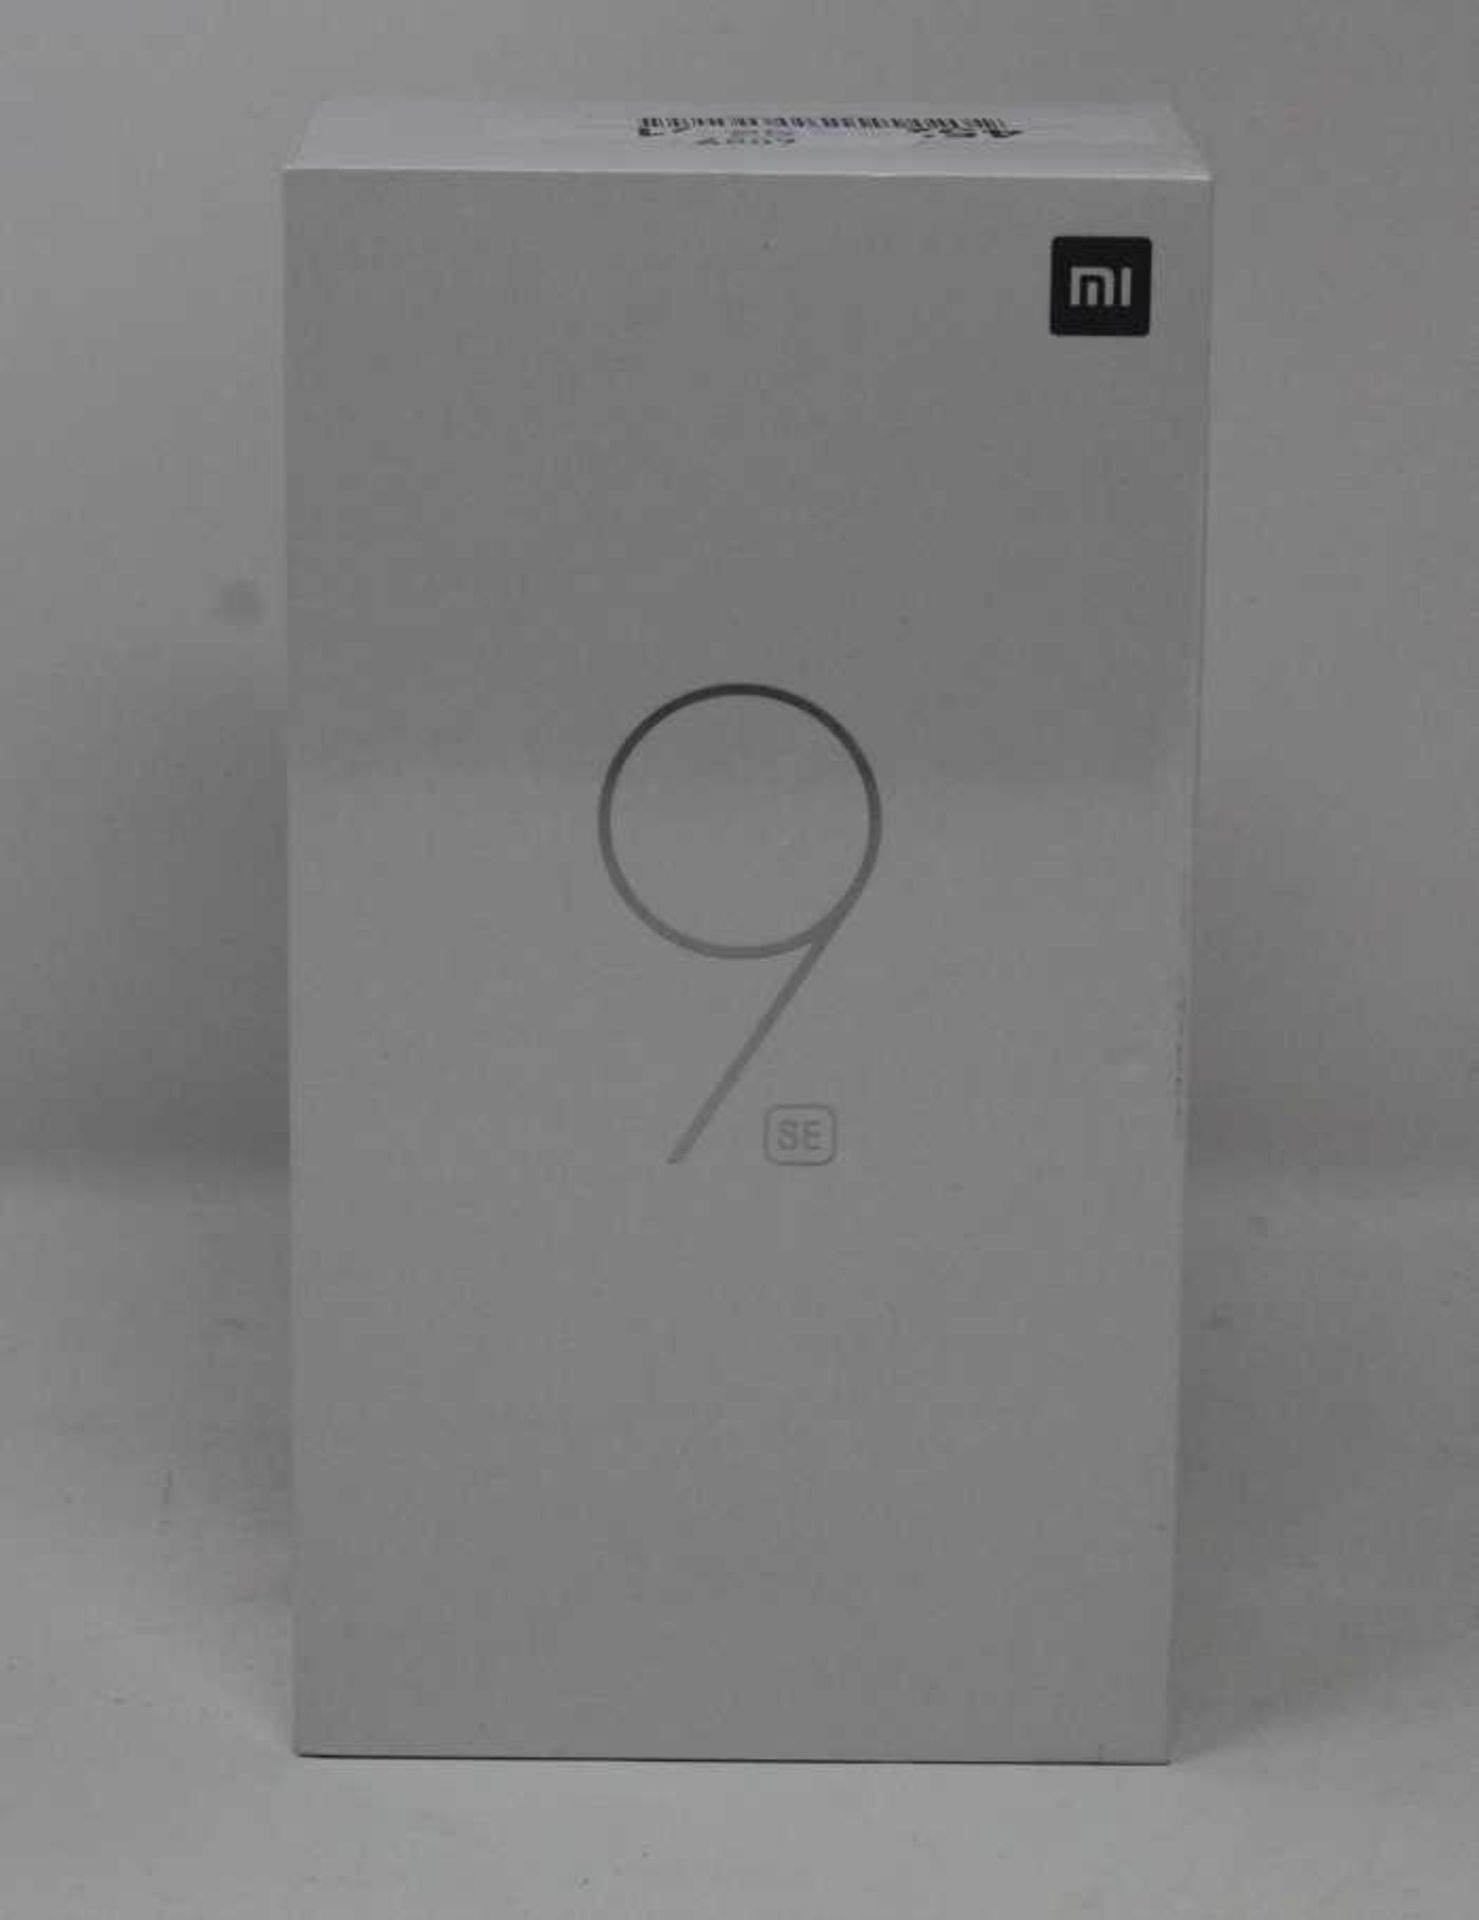 A boxed as new Xiaomi Mi 9 SE Global Version 6GB RAM 64GB Storage Android Smartphone in Piano Black